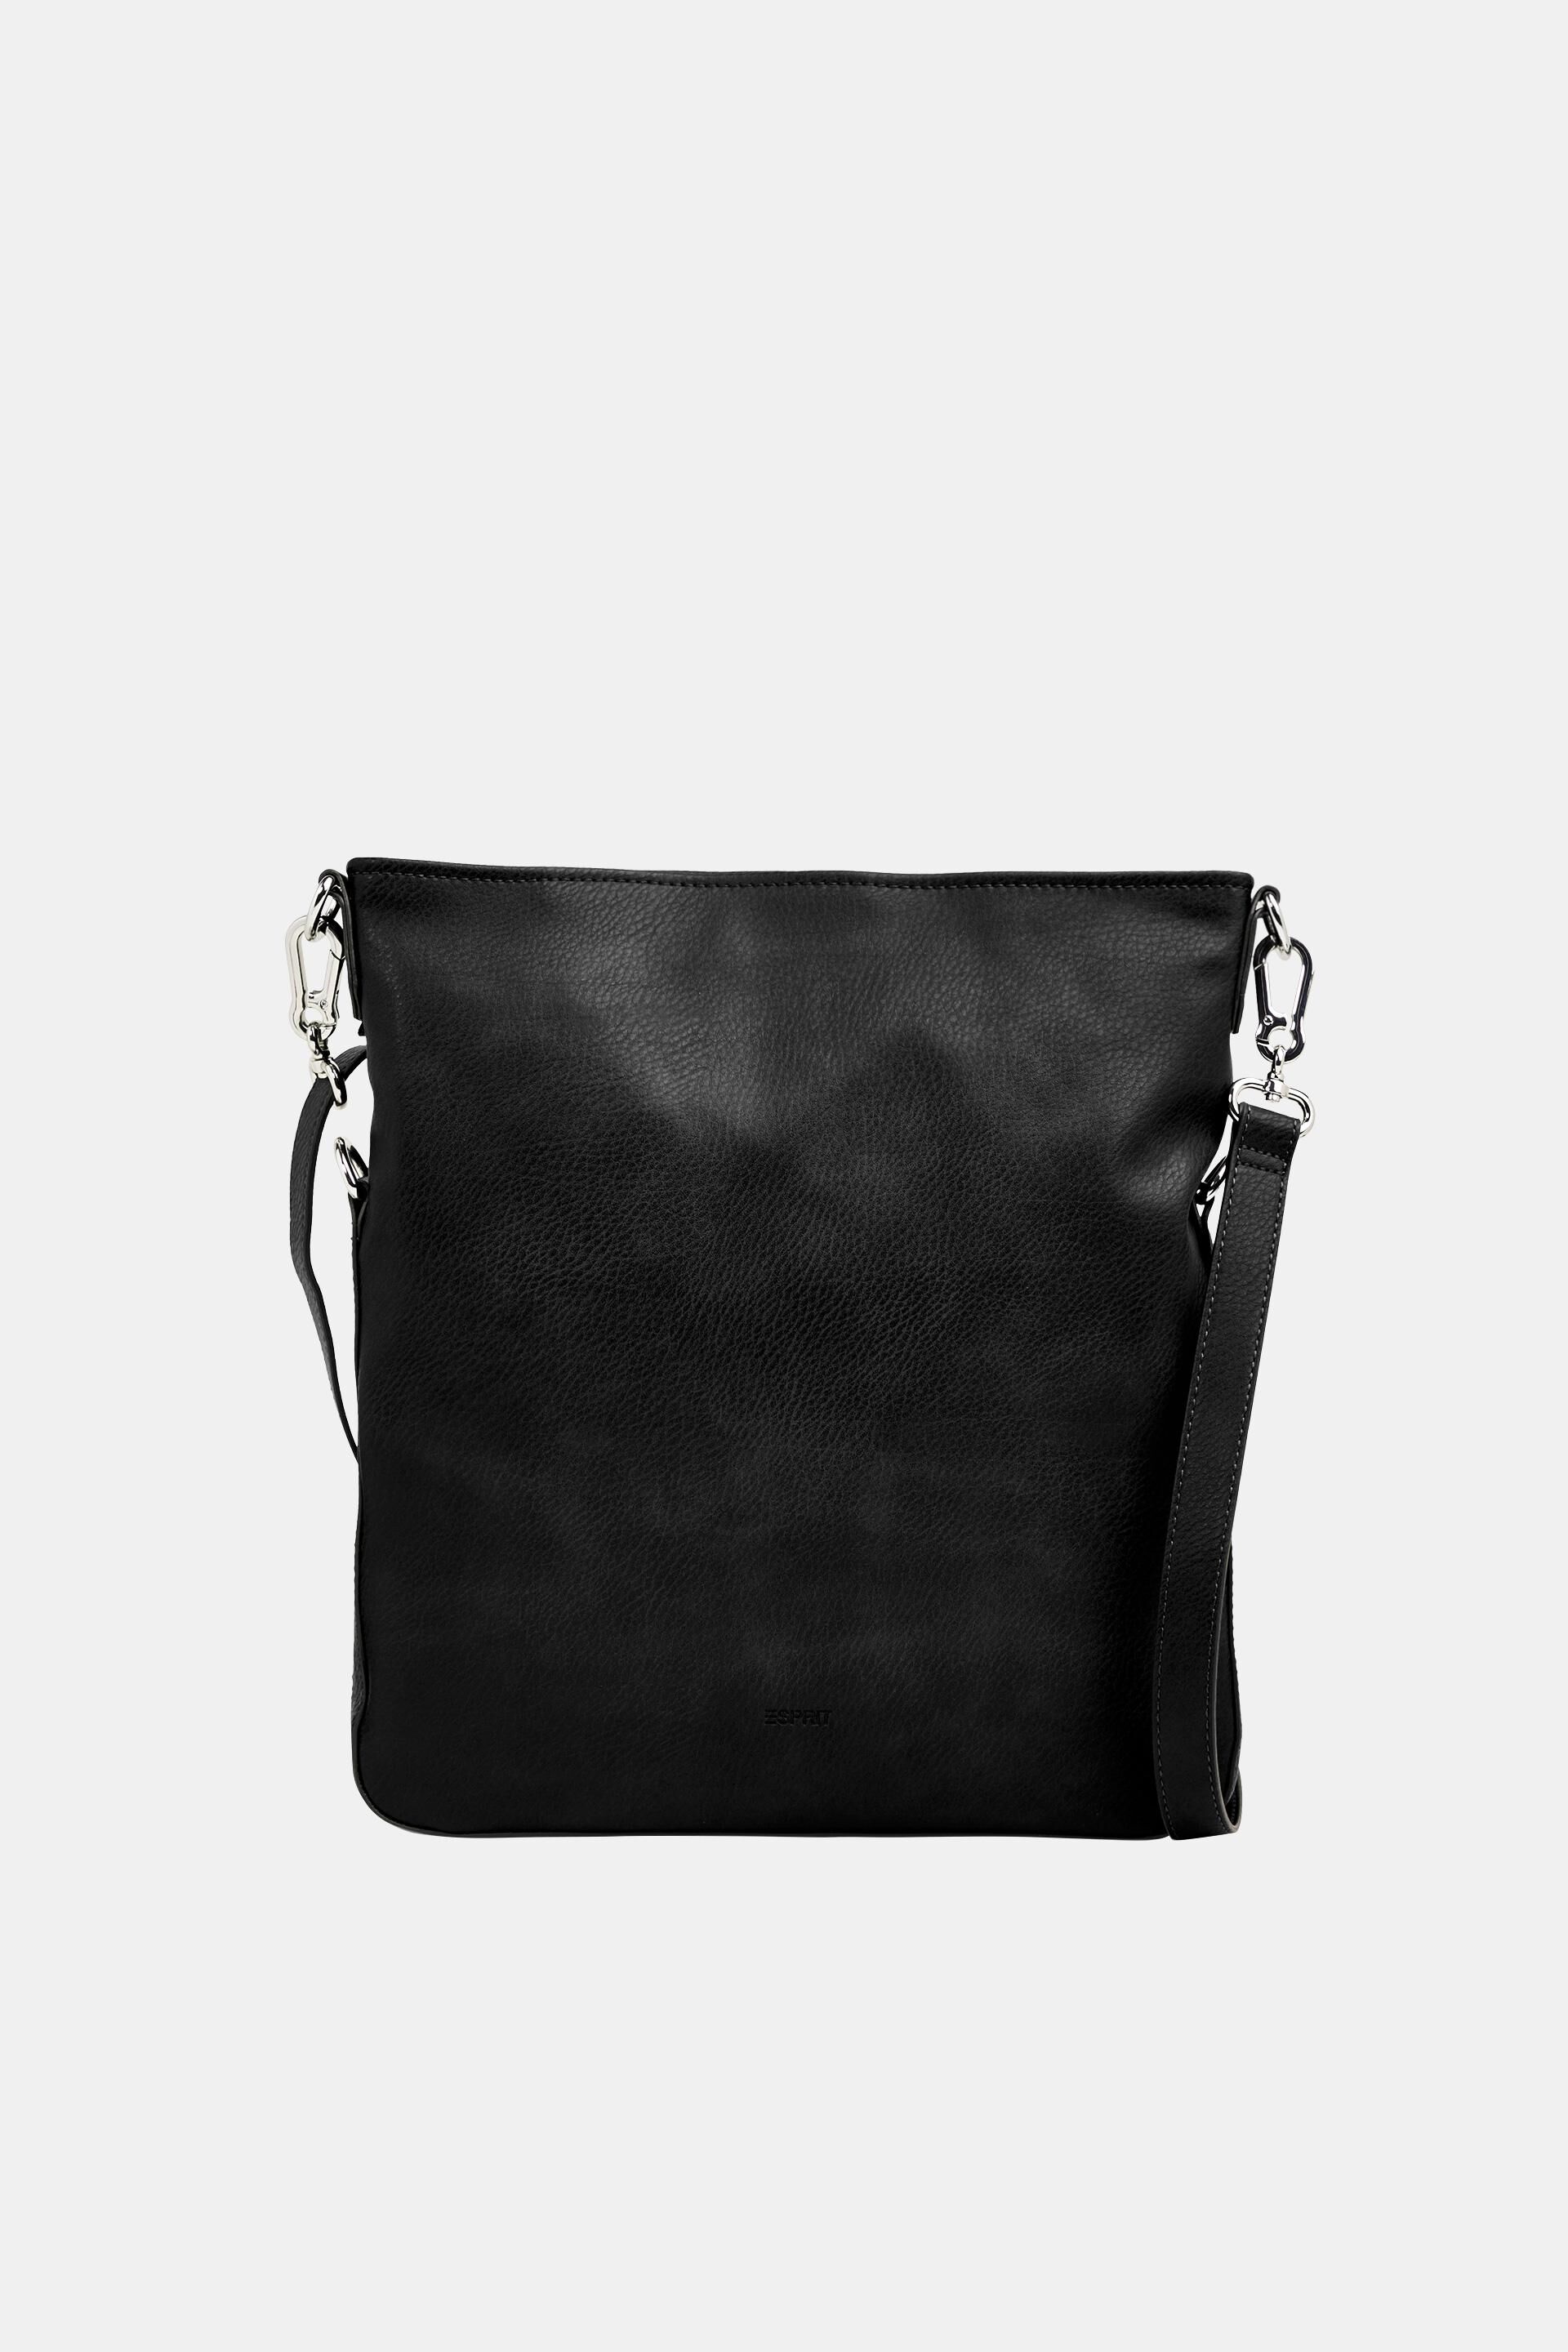 Esprit leather bag faux Flapover in